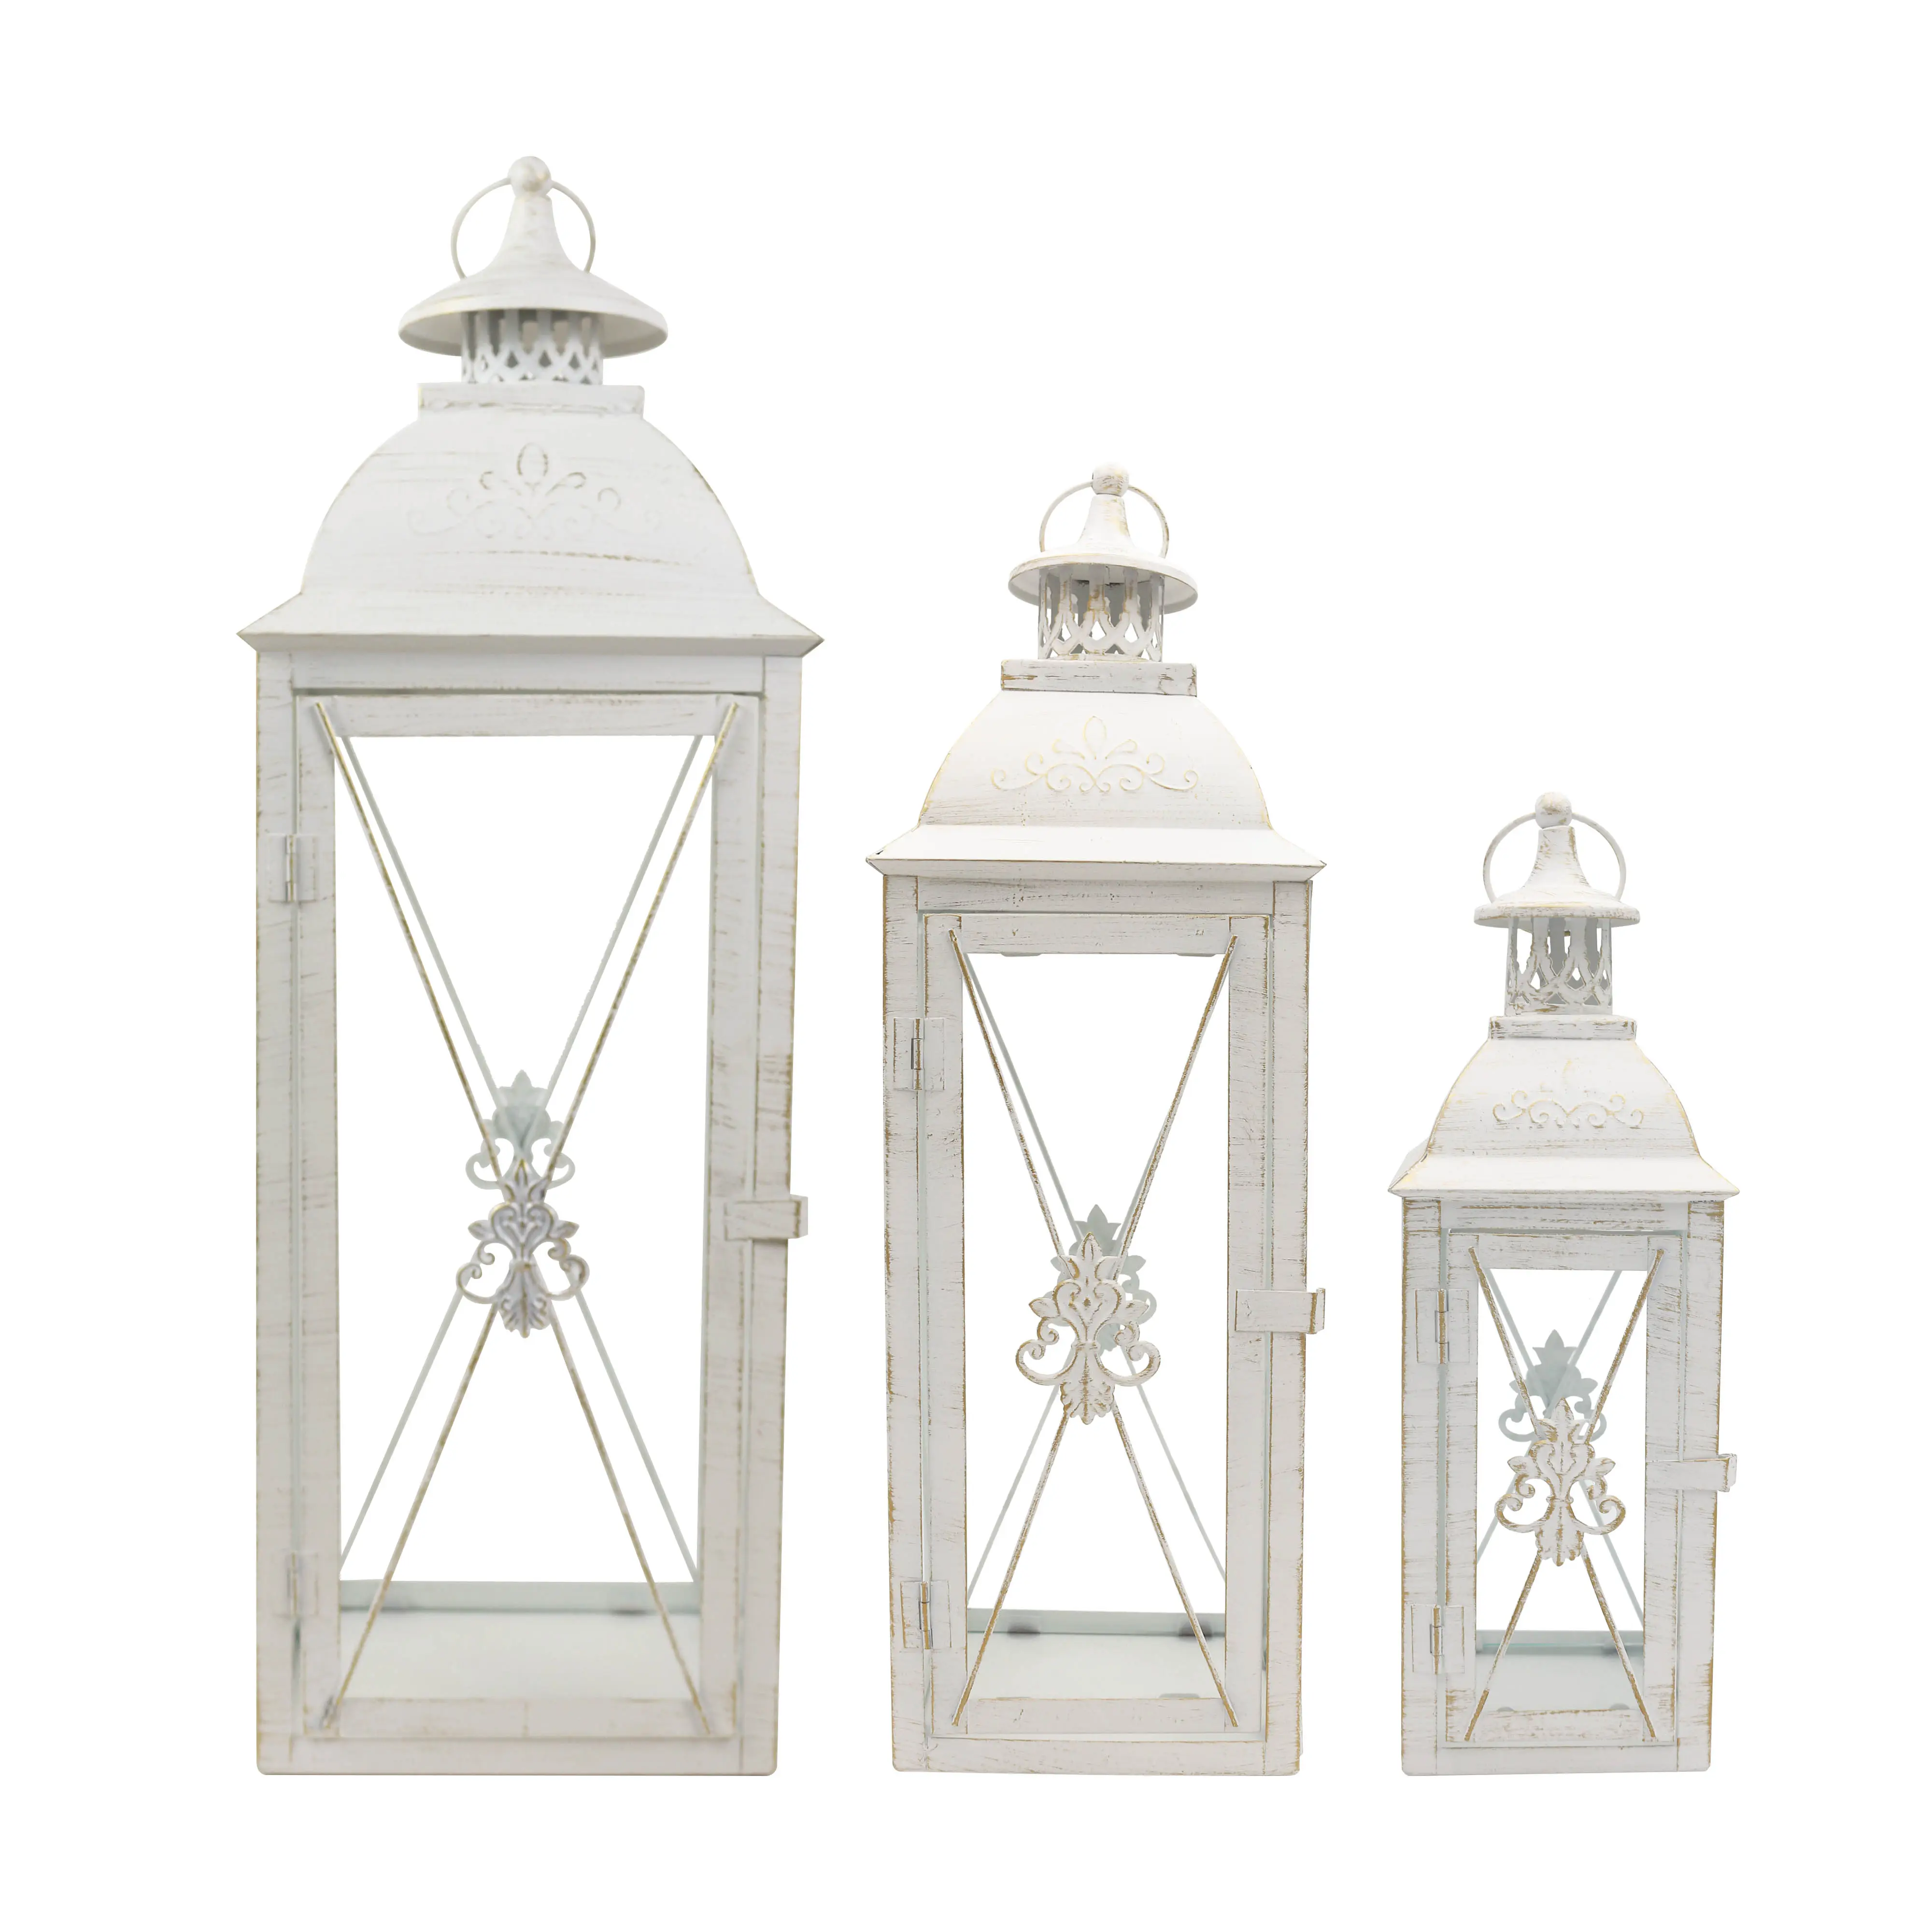 White Rustic distressed metal candle lantern holder for indoor outdoor home porch patio coffee table decorations